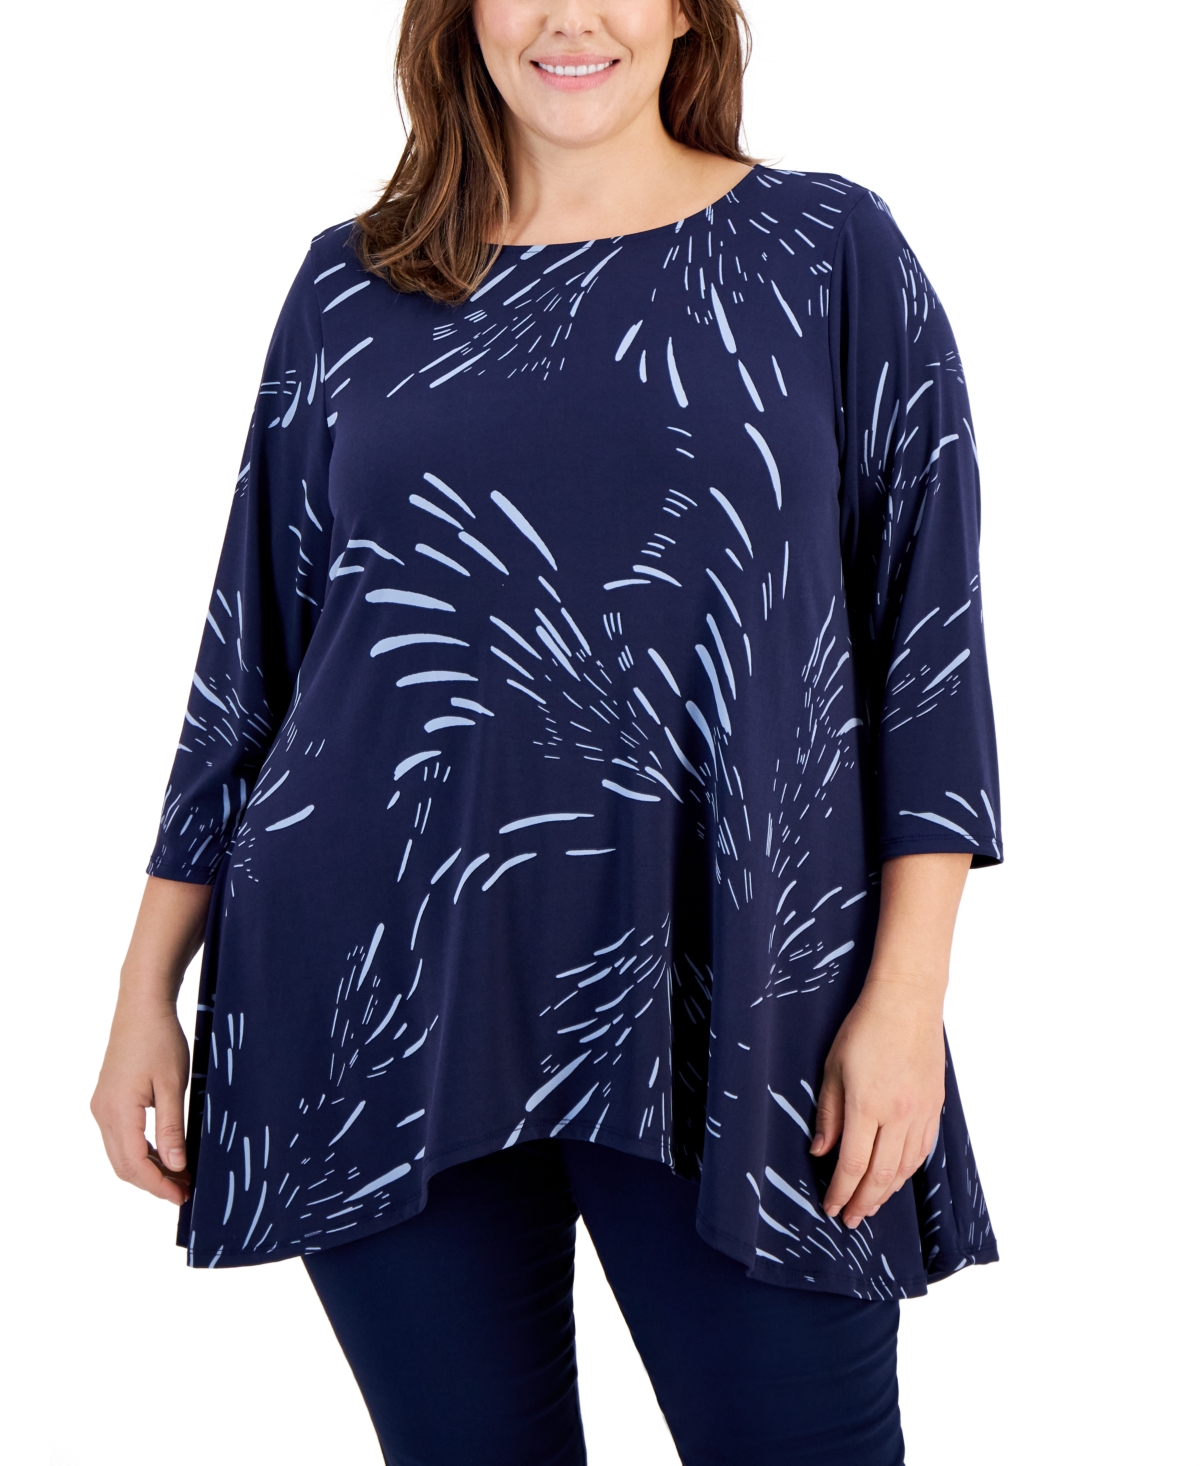 Jm Collection Plus Size Swing Top, Created For Macy's In Intrepid Blue Combo